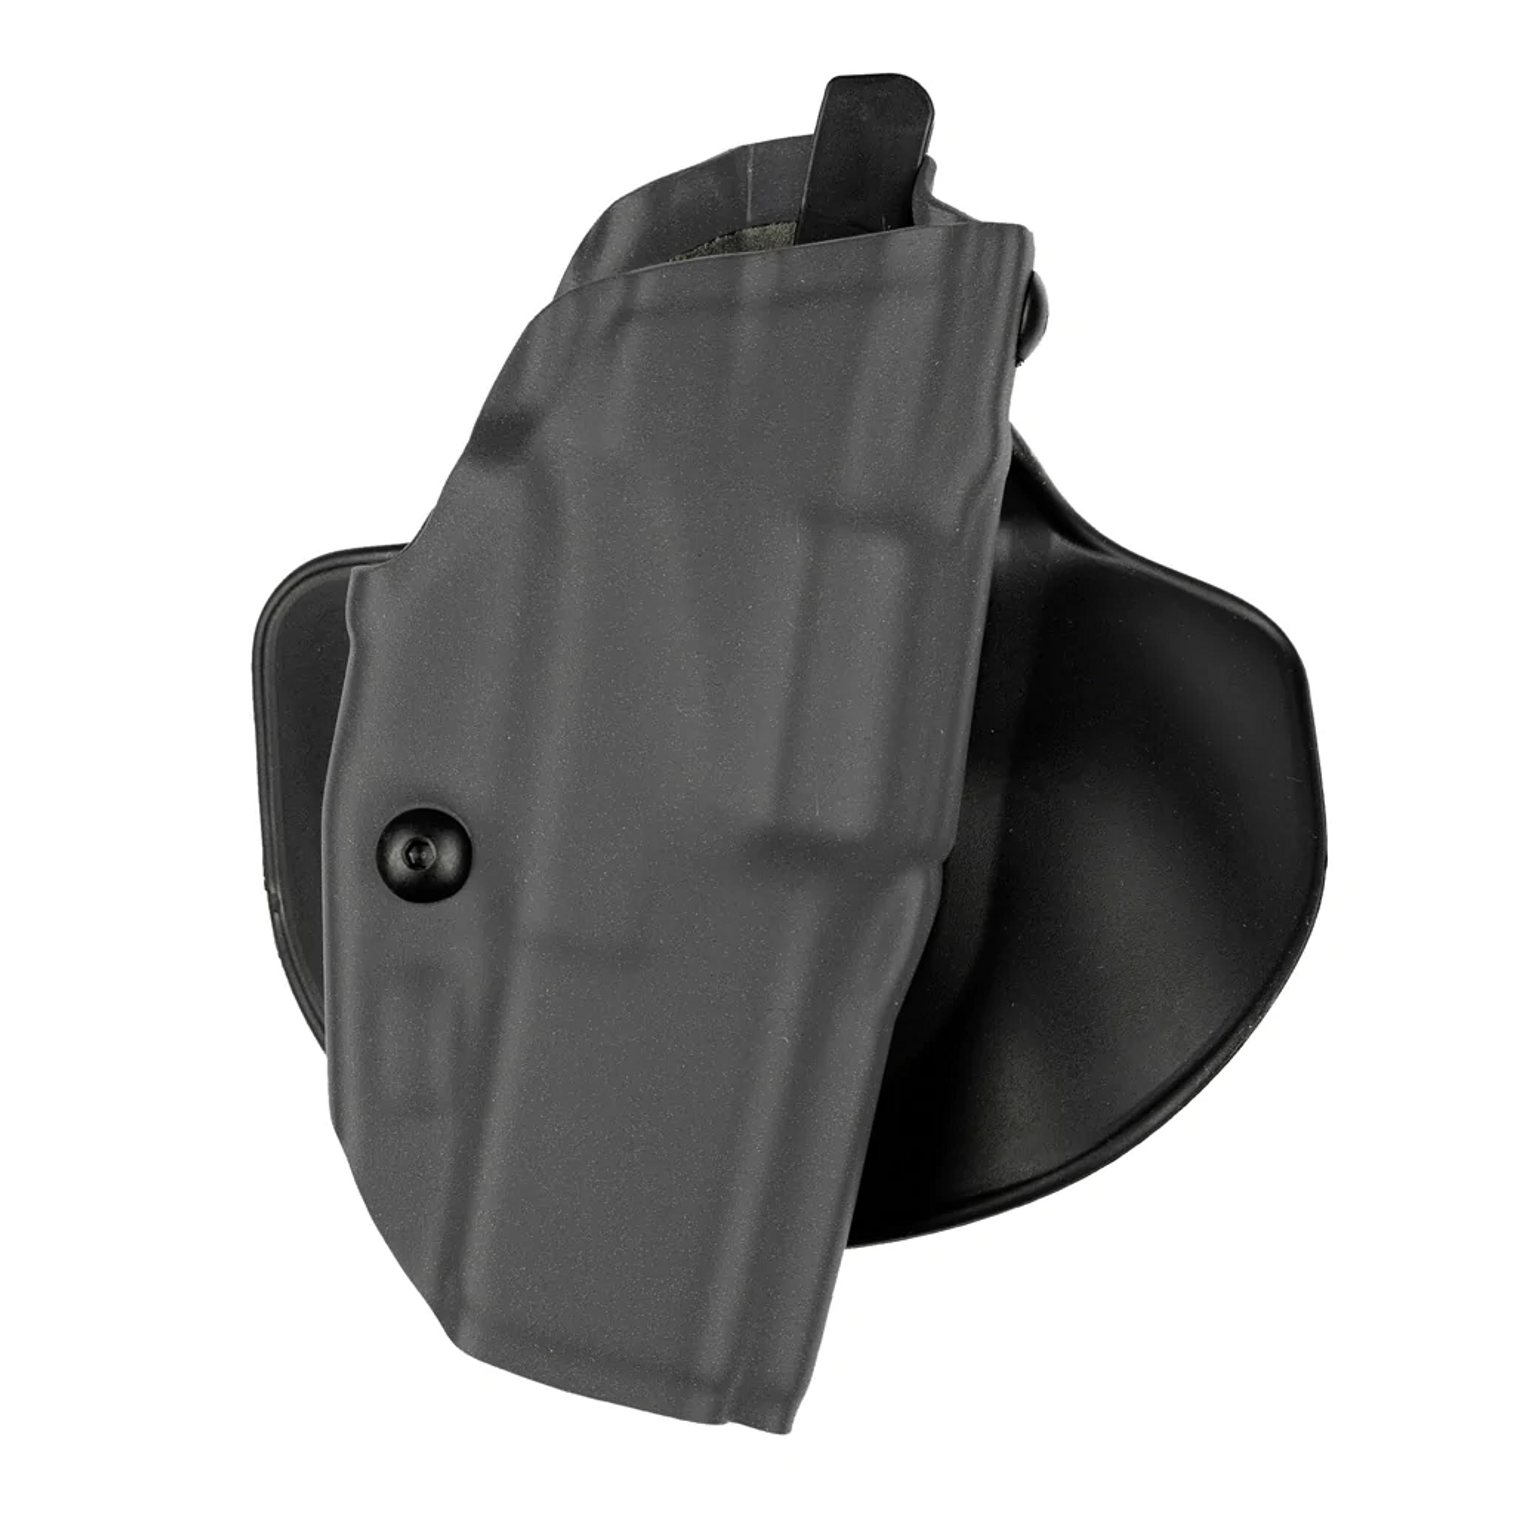 Model 6378 Als Concealment Paddle Holster W/ Belt Loop For Smith & Wesson M&p Shield 9